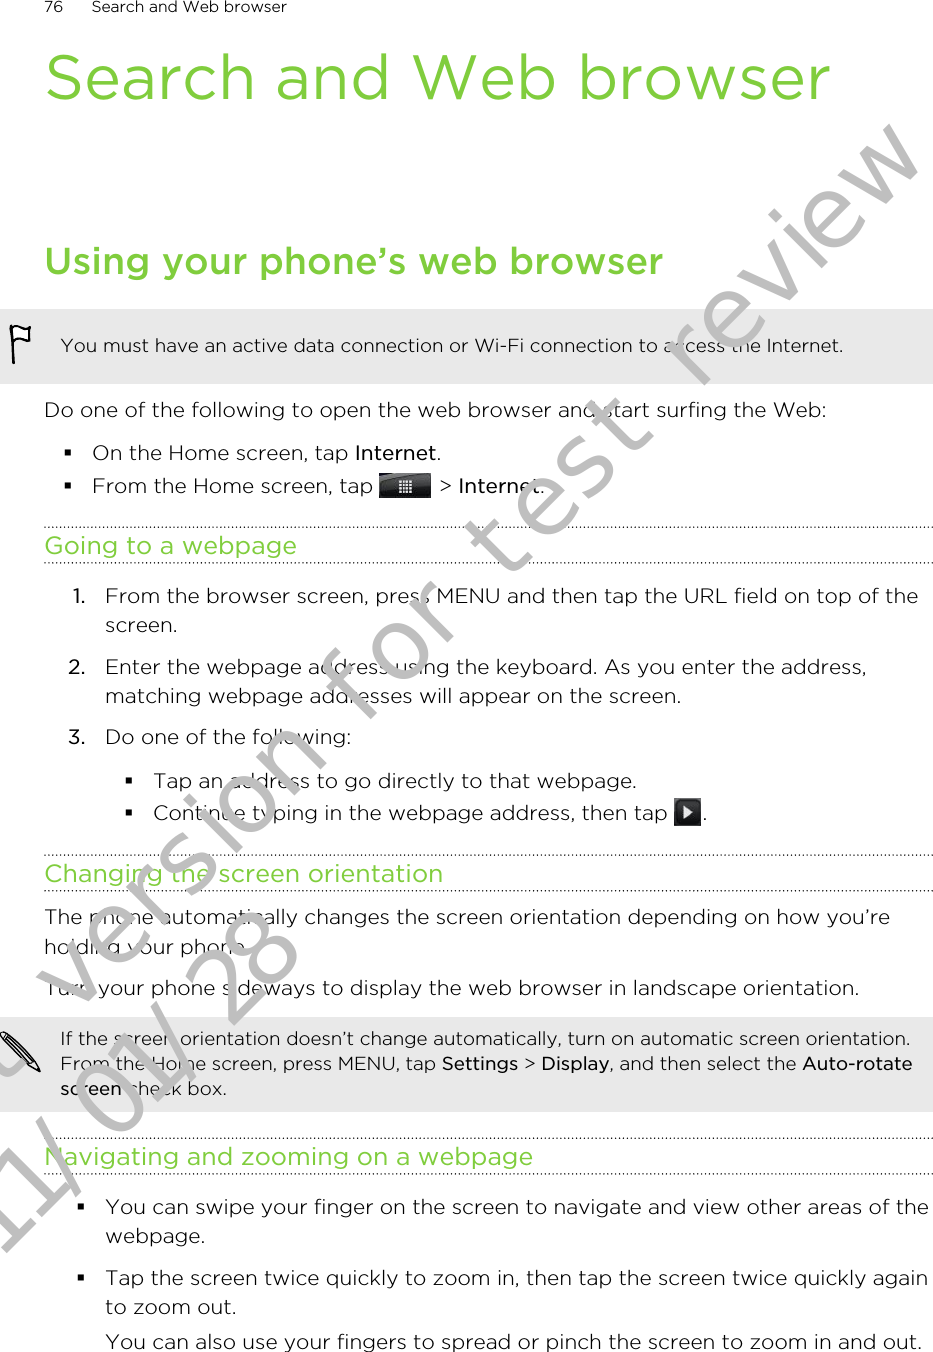 Search and Web browserUsing your phone’s web browserYou must have an active data connection or Wi-Fi connection to access the Internet.Do one of the following to open the web browser and start surfing the Web:§On the Home screen, tap Internet.§From the Home screen, tap   &gt; Internet.Going to a webpage1. From the browser screen, press MENU and then tap the URL field on top of thescreen.2. Enter the webpage address using the keyboard. As you enter the address,matching webpage addresses will appear on the screen.3. Do one of the following:§Tap an address to go directly to that webpage.§Continue typing in the webpage address, then tap  .Changing the screen orientationThe phone automatically changes the screen orientation depending on how you’reholding your phone.Turn your phone sideways to display the web browser in landscape orientation.If the screen orientation doesn’t change automatically, turn on automatic screen orientation.From the Home screen, press MENU, tap Settings &gt; Display, and then select the Auto-rotatescreen check box.Navigating and zooming on a webpage§You can swipe your finger on the screen to navigate and view other areas of thewebpage.§Tap the screen twice quickly to zoom in, then tap the screen twice quickly againto zoom out.You can also use your fingers to spread or pinch the screen to zoom in and out.76 Search and Web browserDraft version for test review 2011/01/28 